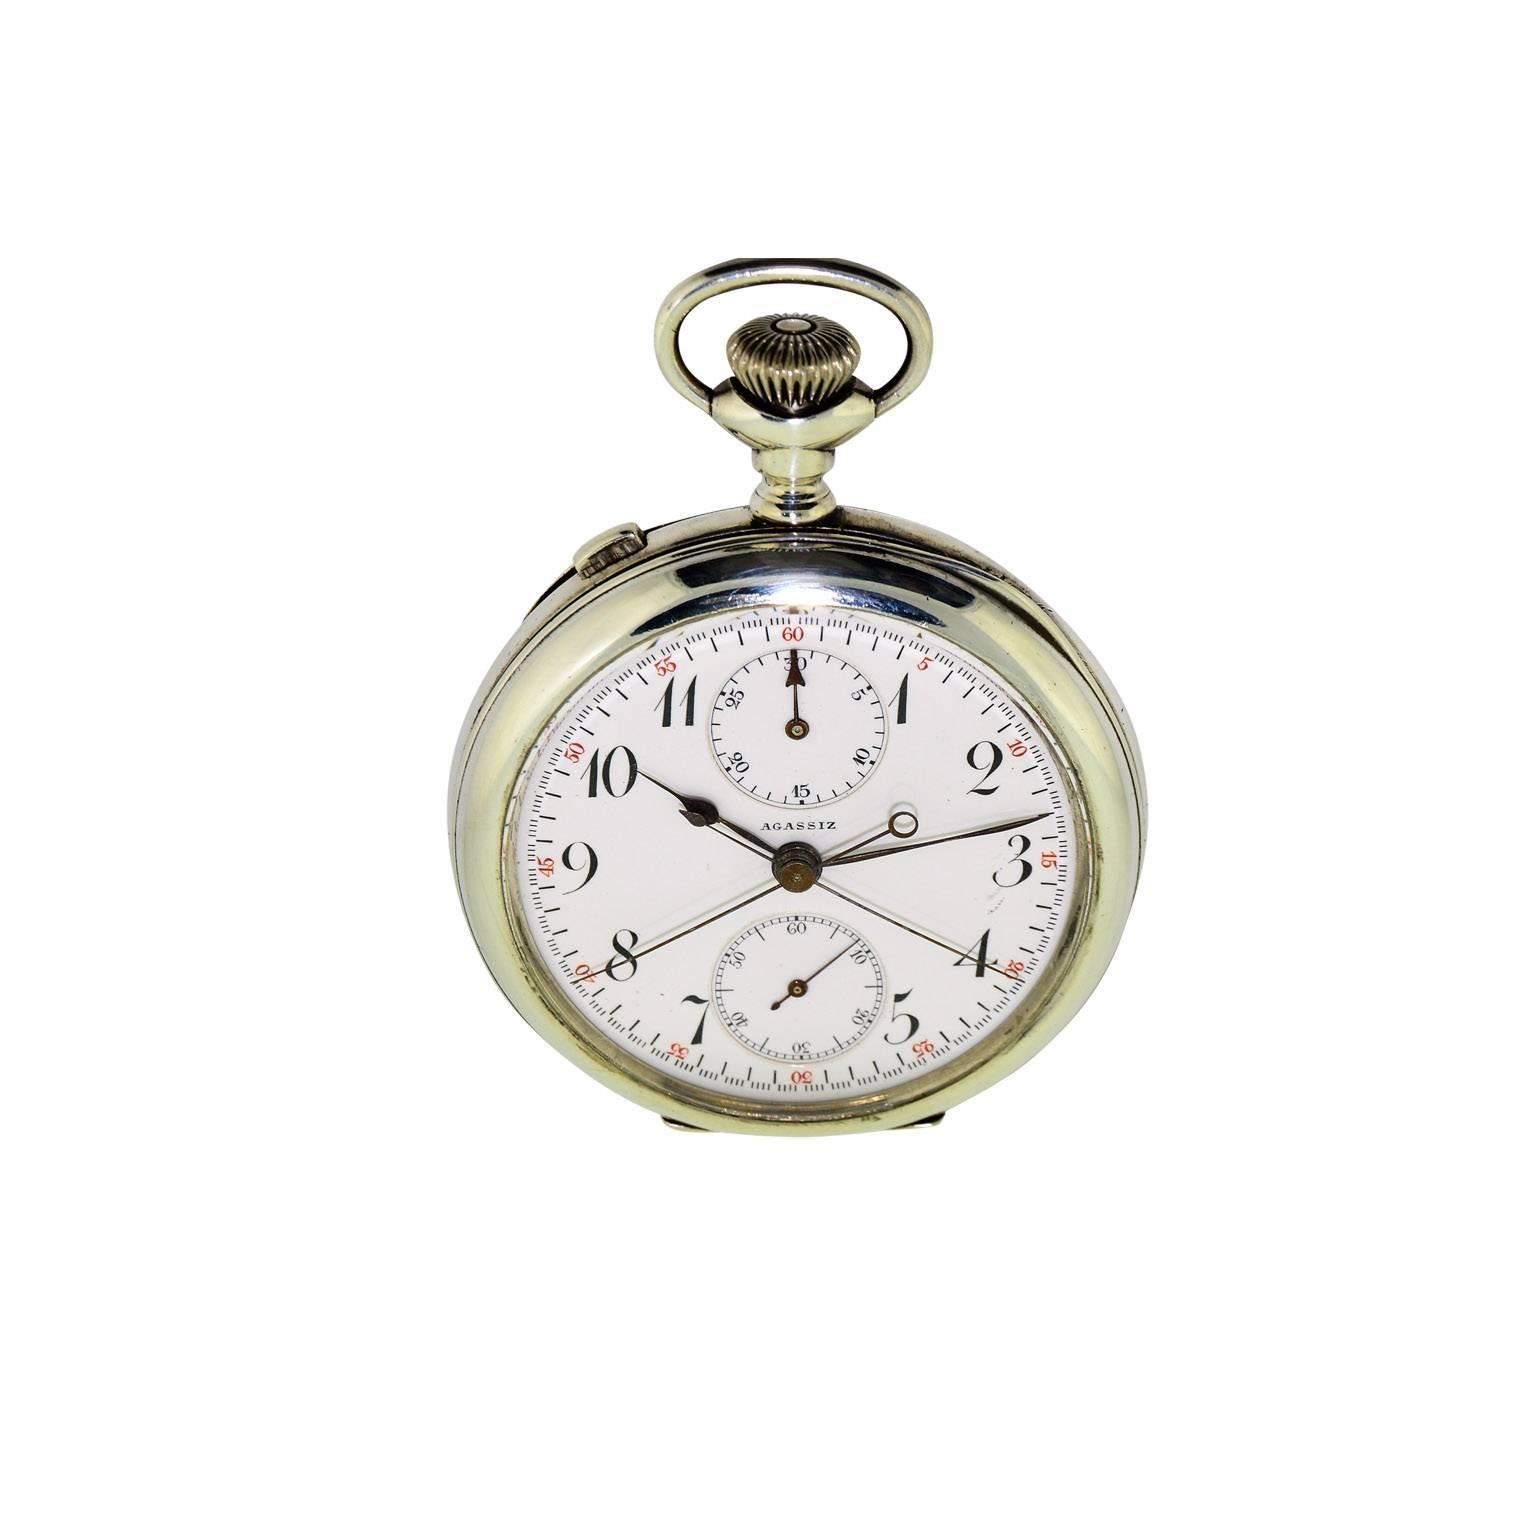 FACTORY / HOUSE: Agassiz Watch Company
STYLE / REFERENCE: Open Faced / Split Seconds Chronograph
METAL / MATERIAL: Sterling Silver
DIMENSIONS: Length & Diameter 52mm
CIRCA: 1910 / 1920
MOVEMENT / CALIBER: Manual Winding / 19 Jewels / High Grade
DIAL